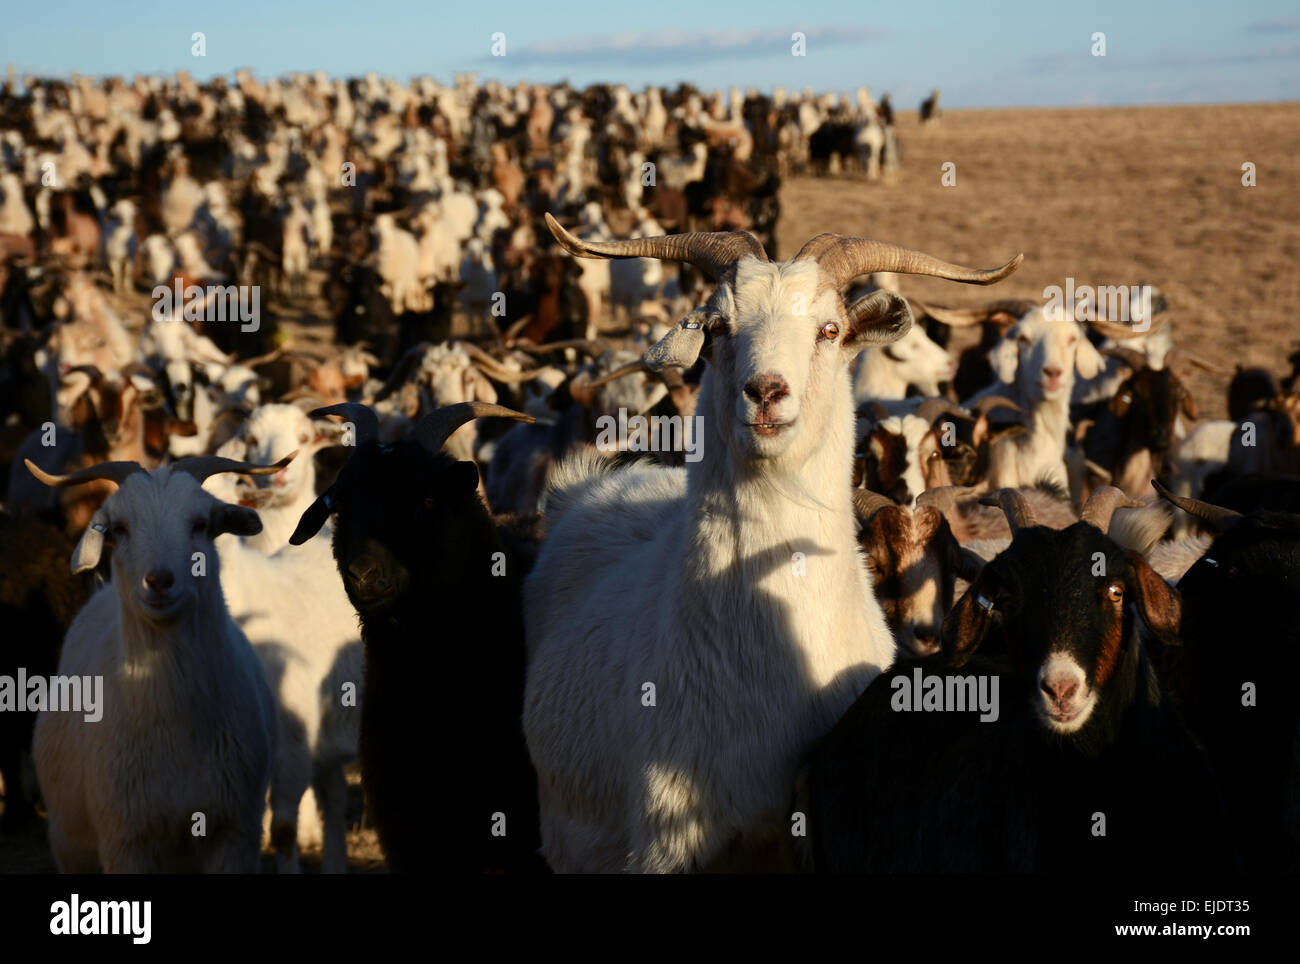 WELLINGTON, CO: Professional goatherder Lani Malmberg owns this herd of a thousand Cashmere goats. Stock Photo